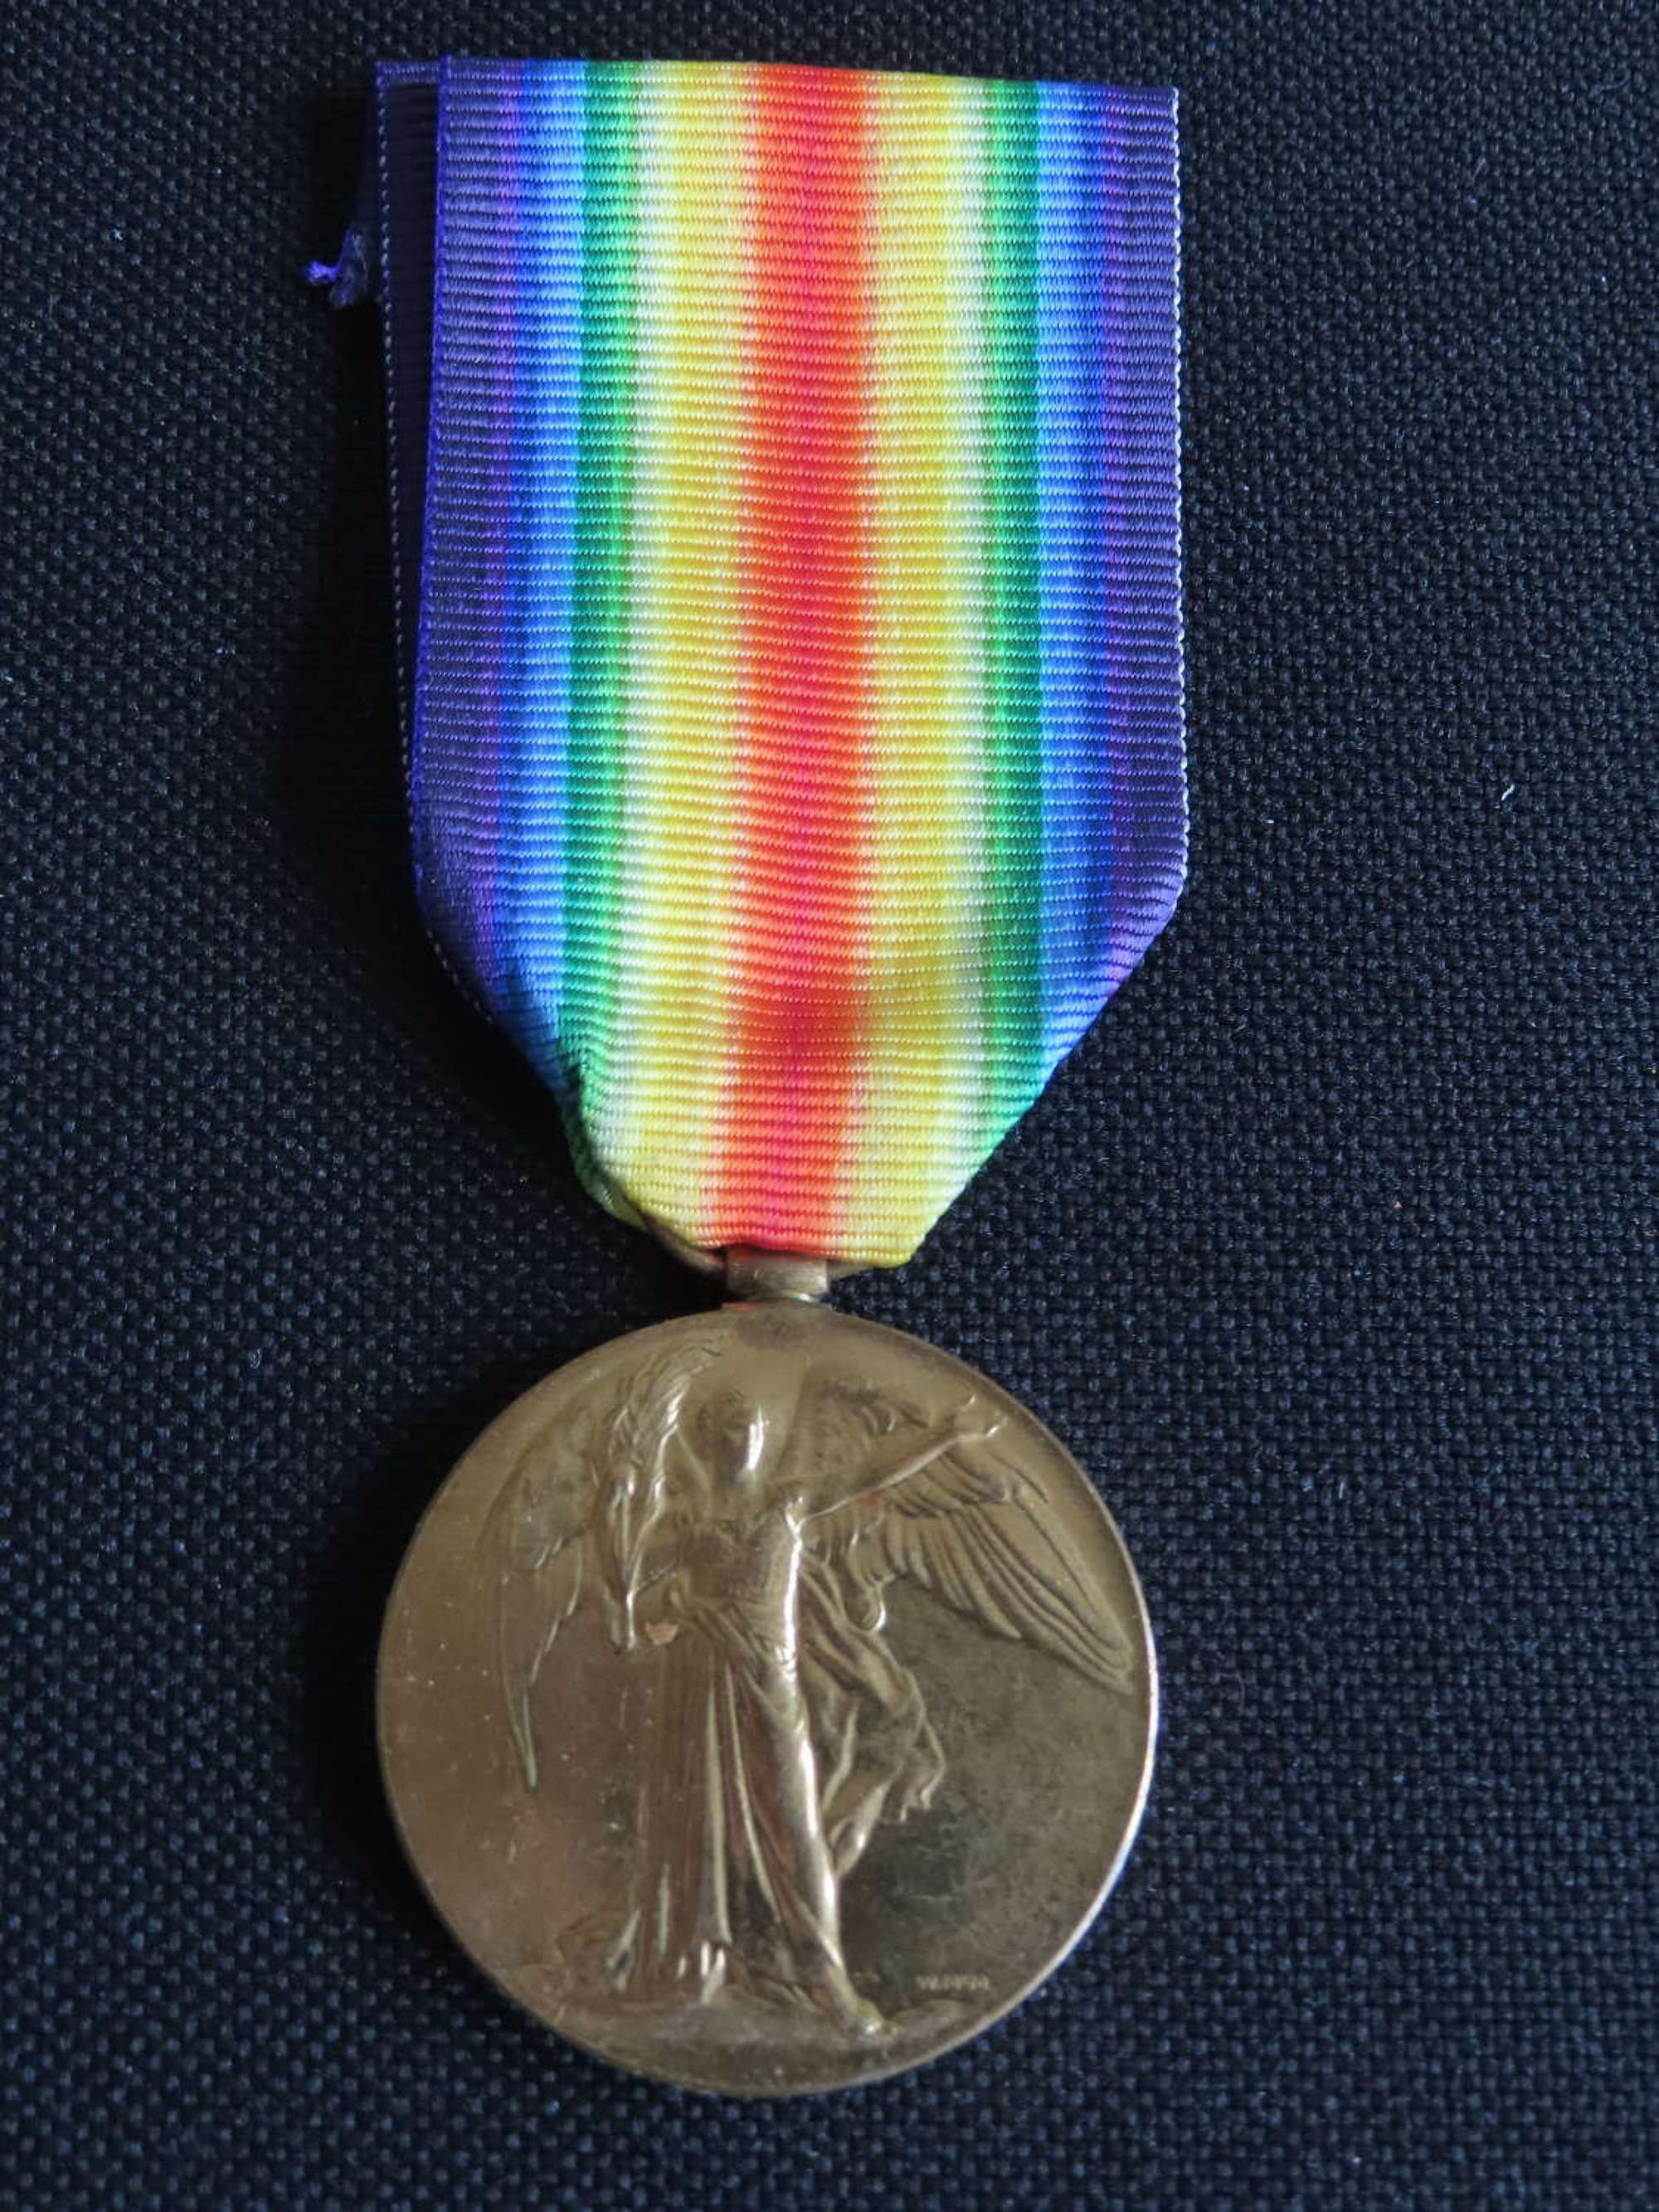 WW1 Victory Medal awarded to 182714 Gnr J Smith Royal Artillery